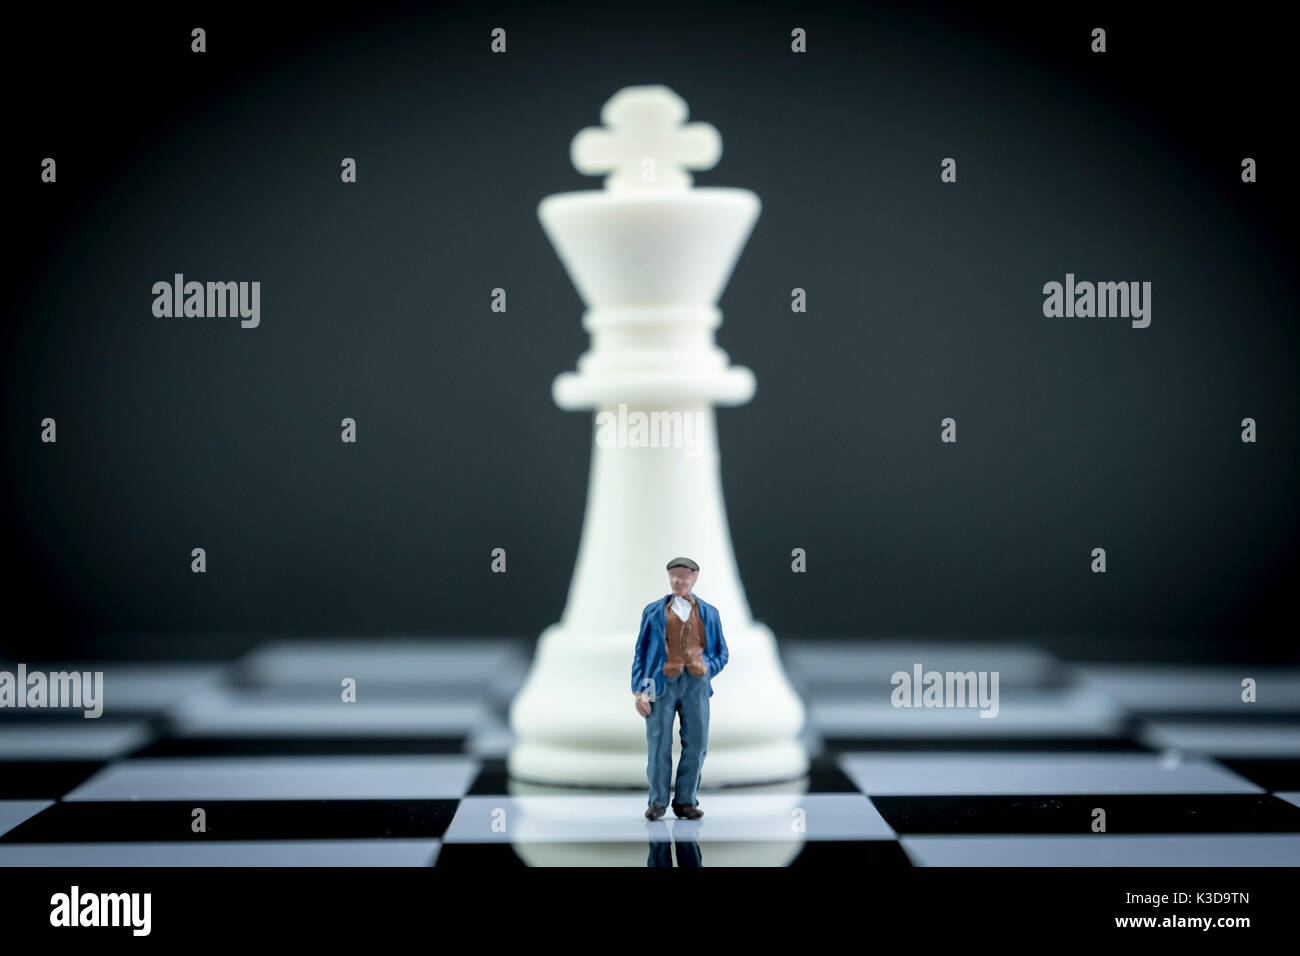 Miniature figure of a man in front of chess piece, conceptual image Stock Photo